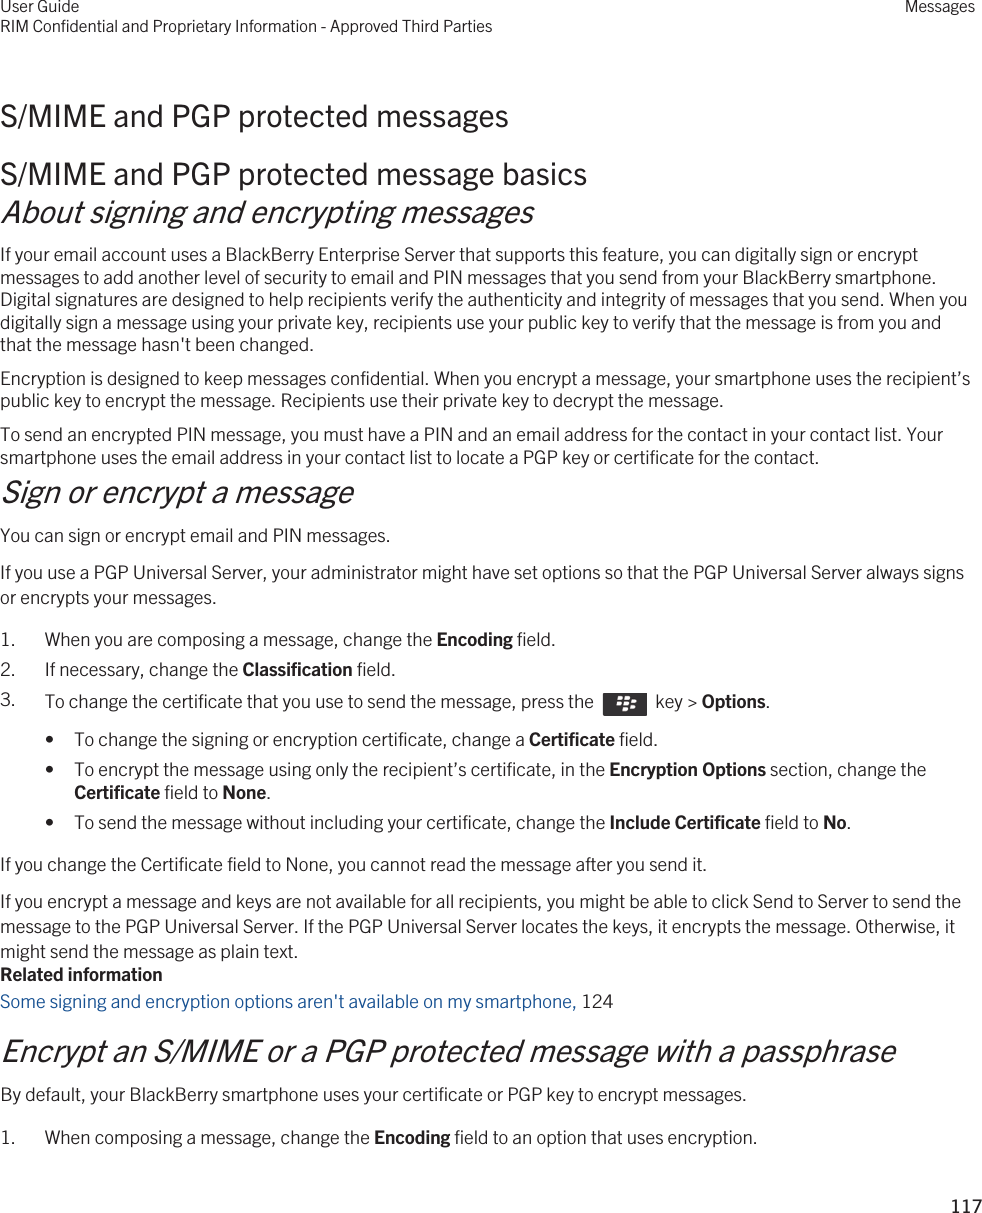 S/MIME and PGP protected messagesS/MIME and PGP protected message basicsAbout signing and encrypting messagesIf your email account uses a BlackBerry Enterprise Server that supports this feature, you can digitally sign or encrypt messages to add another level of security to email and PIN messages that you send from your BlackBerry smartphone. Digital signatures are designed to help recipients verify the authenticity and integrity of messages that you send. When you digitally sign a message using your private key, recipients use your public key to verify that the message is from you and that the message hasn&apos;t been changed.Encryption is designed to keep messages confidential. When you encrypt a message, your smartphone uses the recipient’s public key to encrypt the message. Recipients use their private key to decrypt the message.To send an encrypted PIN message, you must have a PIN and an email address for the contact in your contact list. Your smartphone uses the email address in your contact list to locate a PGP key or certificate for the contact.Sign or encrypt a messageYou can sign or encrypt email and PIN messages.If you use a PGP Universal Server, your administrator might have set options so that the PGP Universal Server always signs or encrypts your messages.1. When you are composing a message, change the Encoding field.2. If necessary, change the Classification field.3. To change the certificate that you use to send the message, press the    key &gt; Options. • To change the signing or encryption certificate, change a Certificate field.• To encrypt the message using only the recipient’s certificate, in the Encryption Options section, change the Certificate field to None.• To send the message without including your certificate, change the Include Certificate field to No.If you change the Certificate field to None, you cannot read the message after you send it.If you encrypt a message and keys are not available for all recipients, you might be able to click Send to Server to send the message to the PGP Universal Server. If the PGP Universal Server locates the keys, it encrypts the message. Otherwise, it might send the message as plain text.Related informationSome signing and encryption options aren&apos;t available on my smartphone, 124Encrypt an S/MIME or a PGP protected message with a passphraseBy default, your BlackBerry smartphone uses your certificate or PGP key to encrypt messages.1. When composing a message, change the Encoding field to an option that uses encryption.User GuideRIM Confidential and Proprietary Information - Approved Third PartiesMessages117 